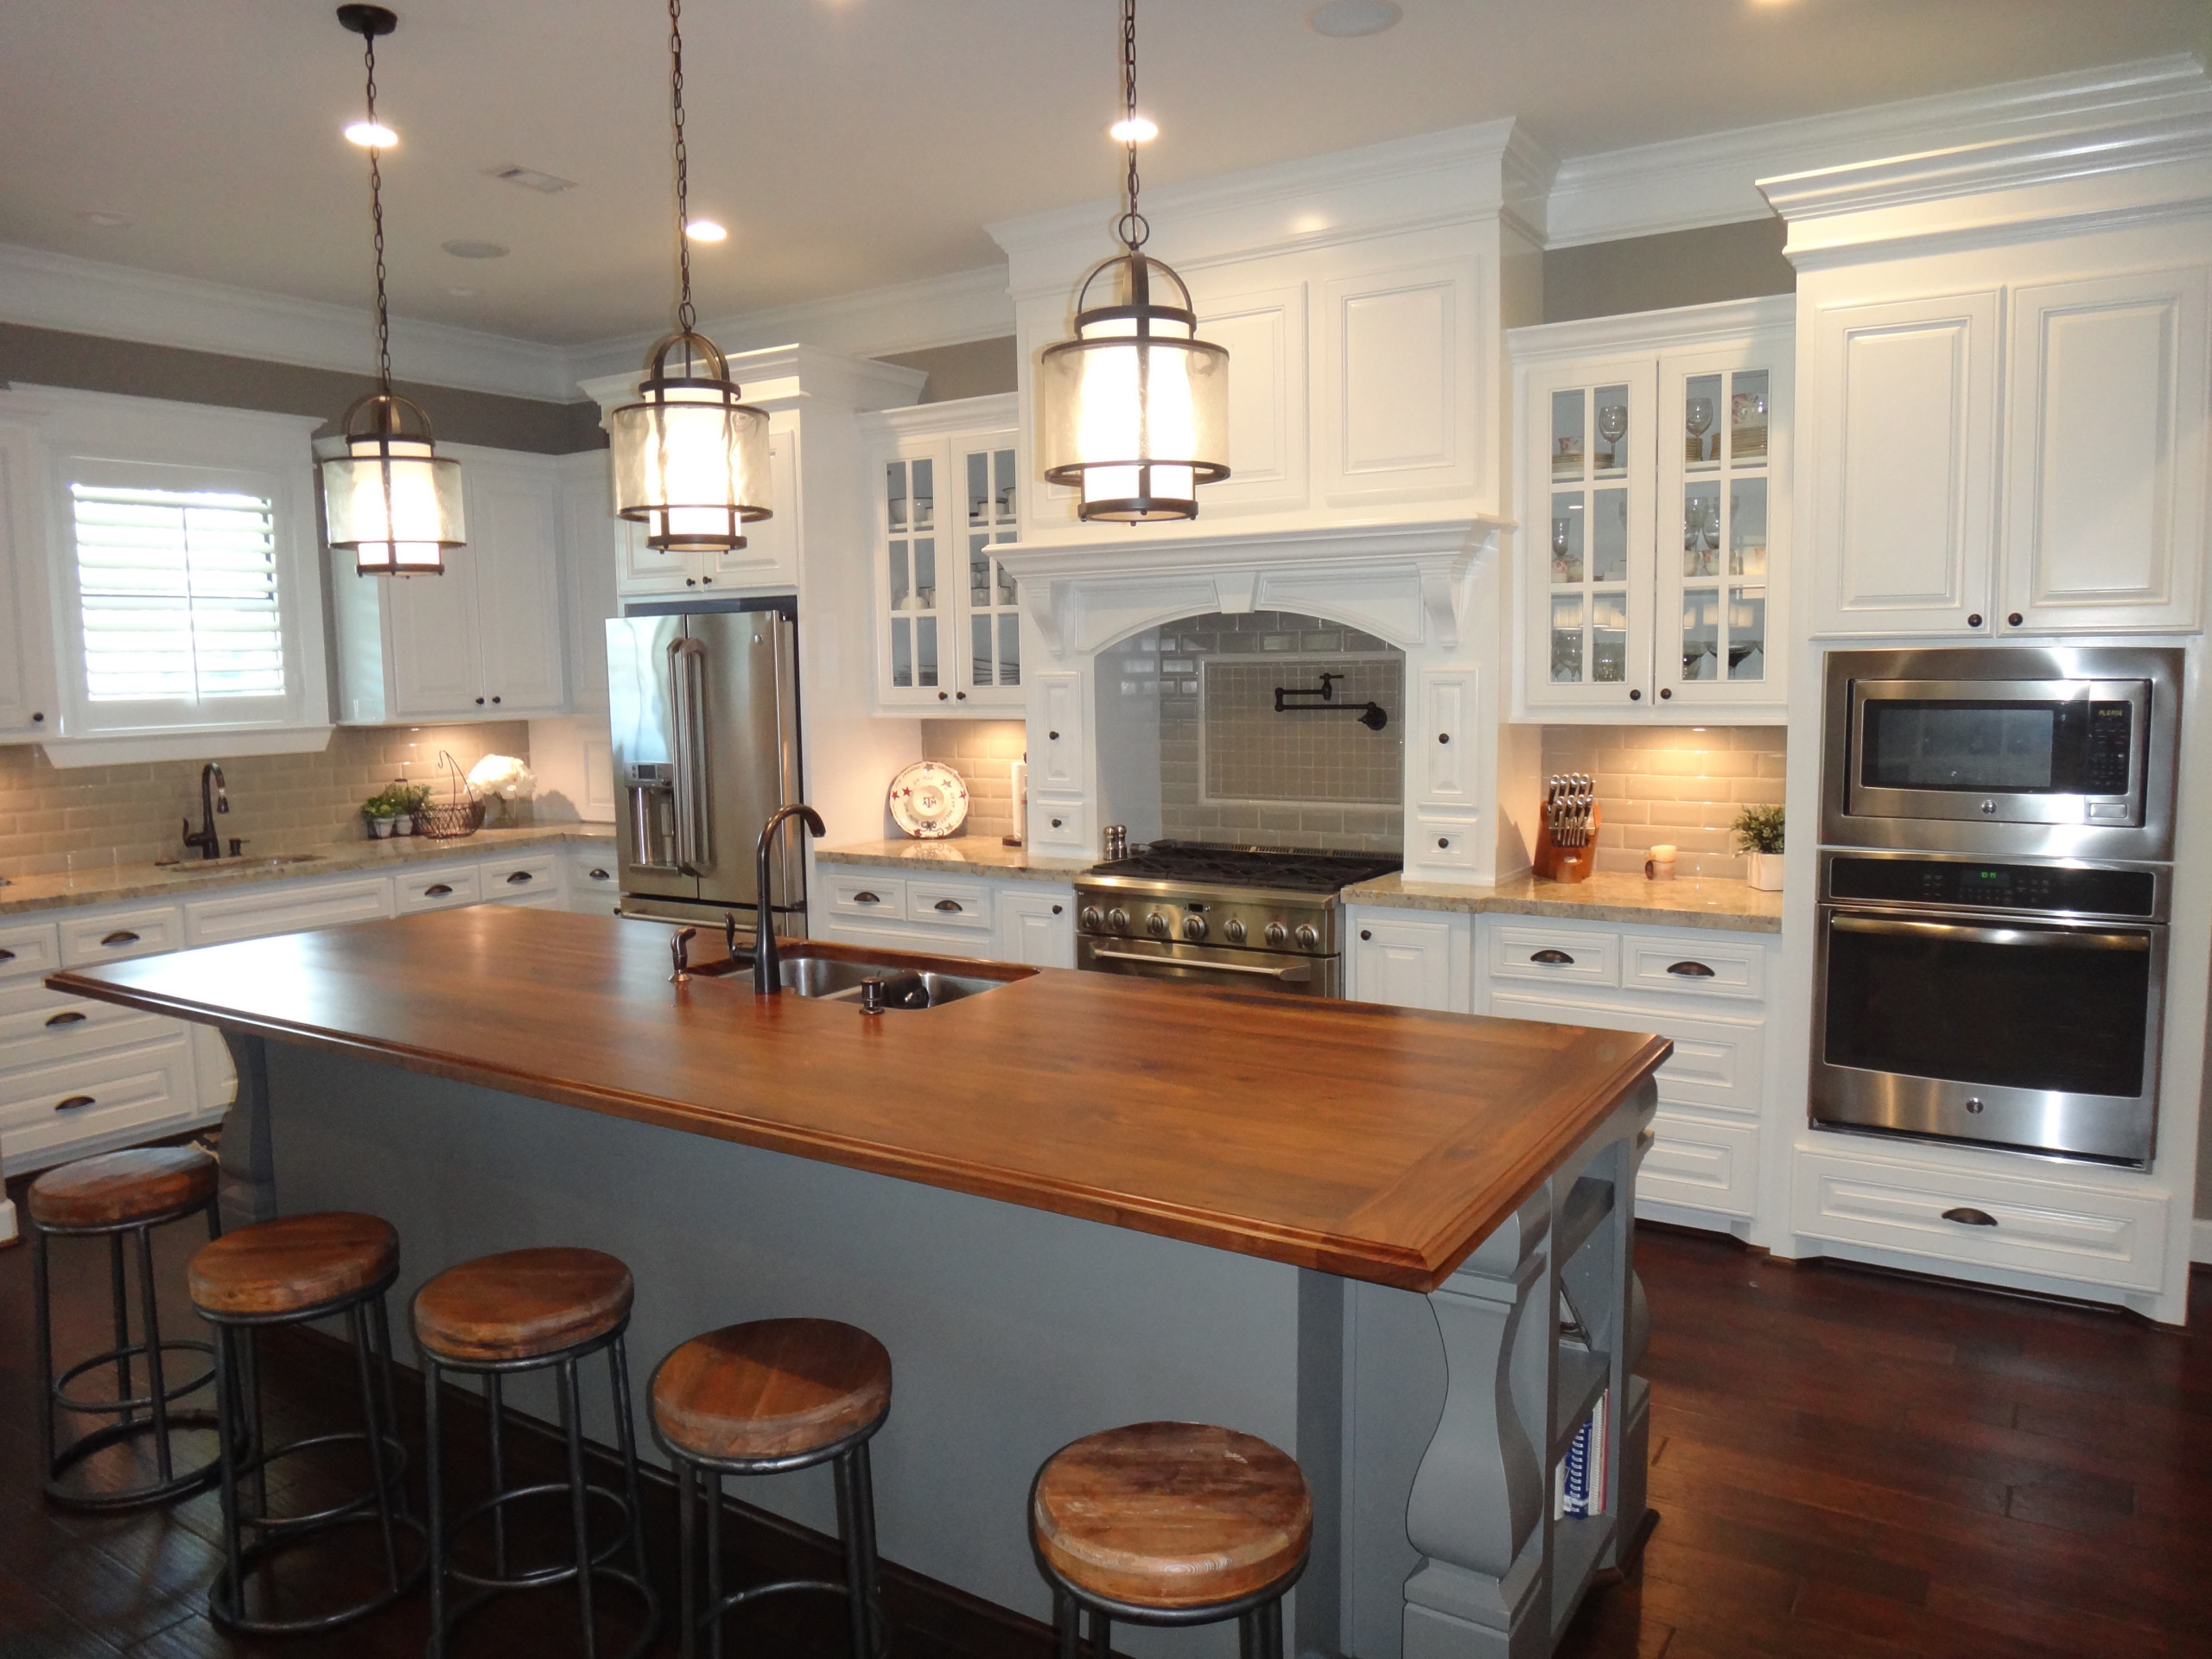 Open concept kitchen with traditional style